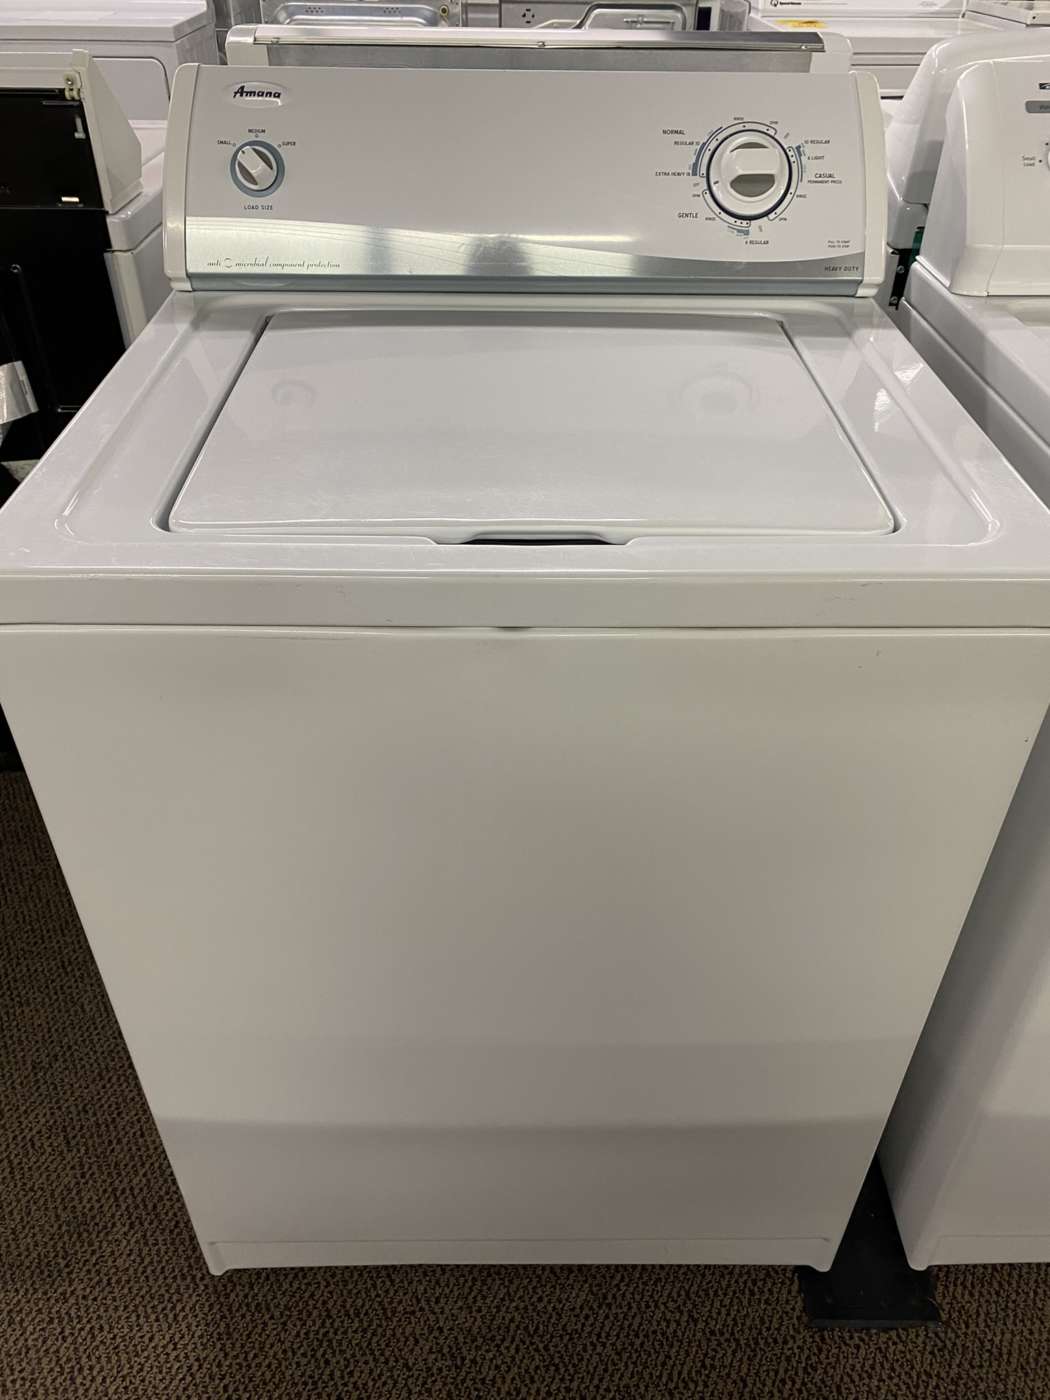 Reconditioned AMANA 3.4 Cu. Ft. Top-Load Washer – White